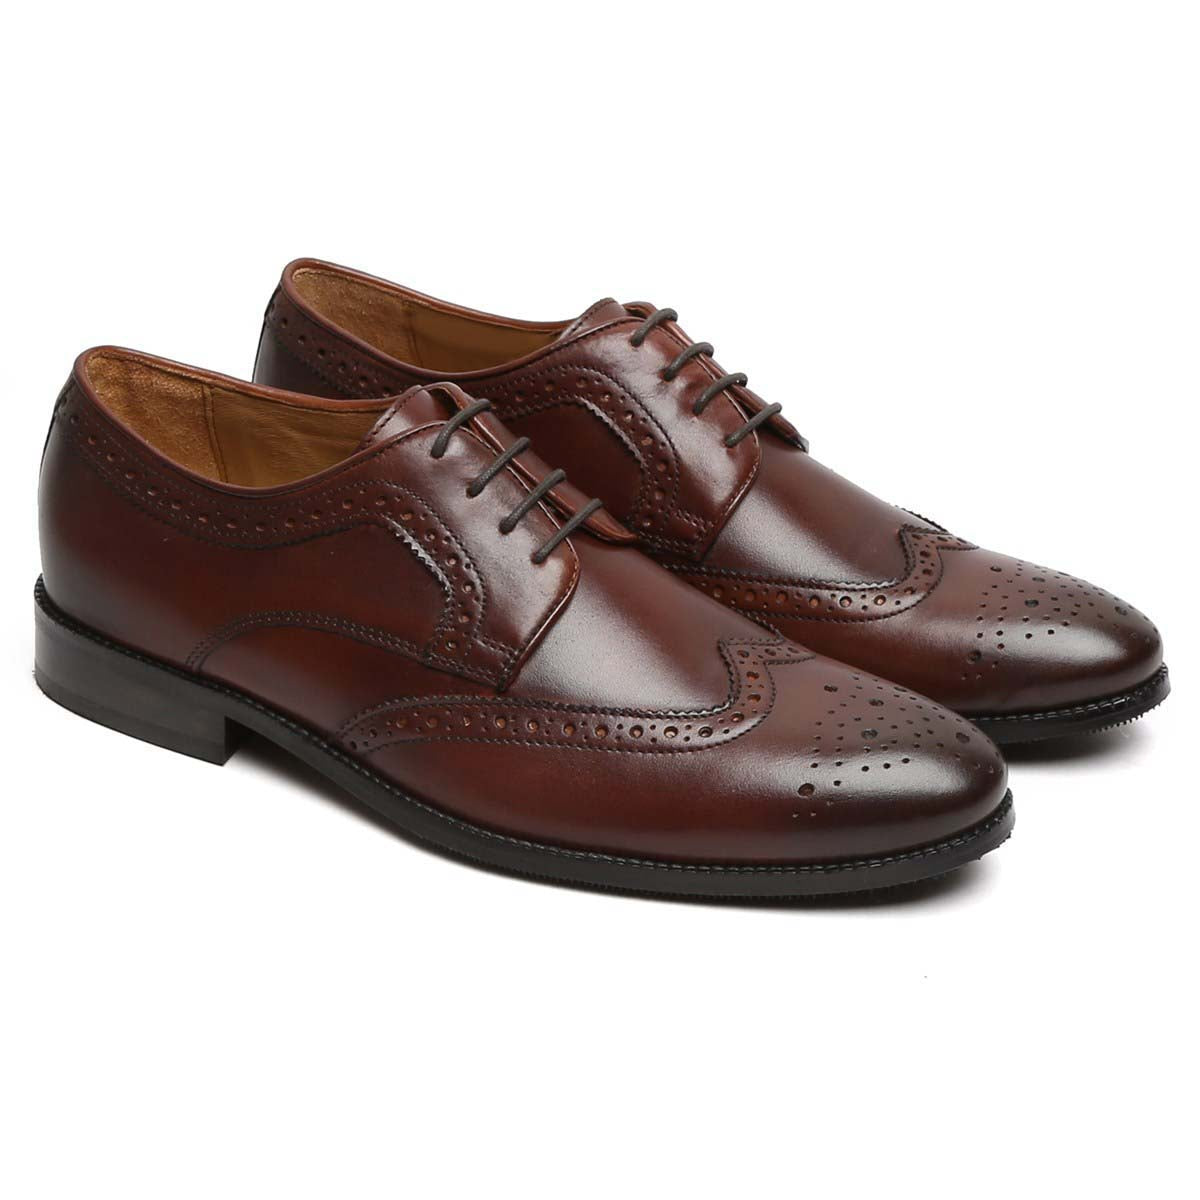 Dark Brown Hand Finished Full Brogue Wingtip Formal Shoes By Brune